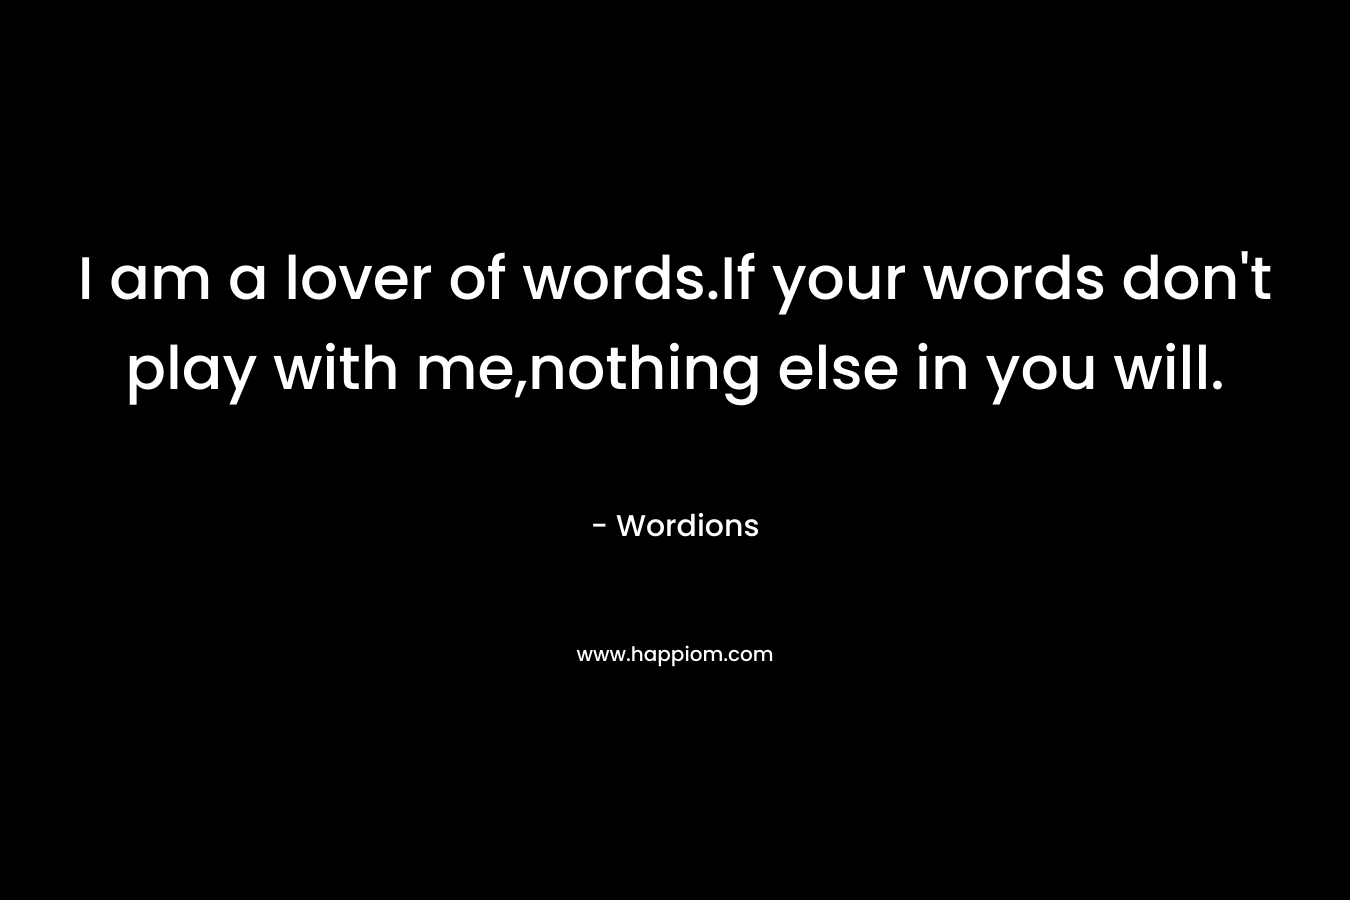 I am a lover of words.If your words don’t play with me,nothing else in you will. – Wordions